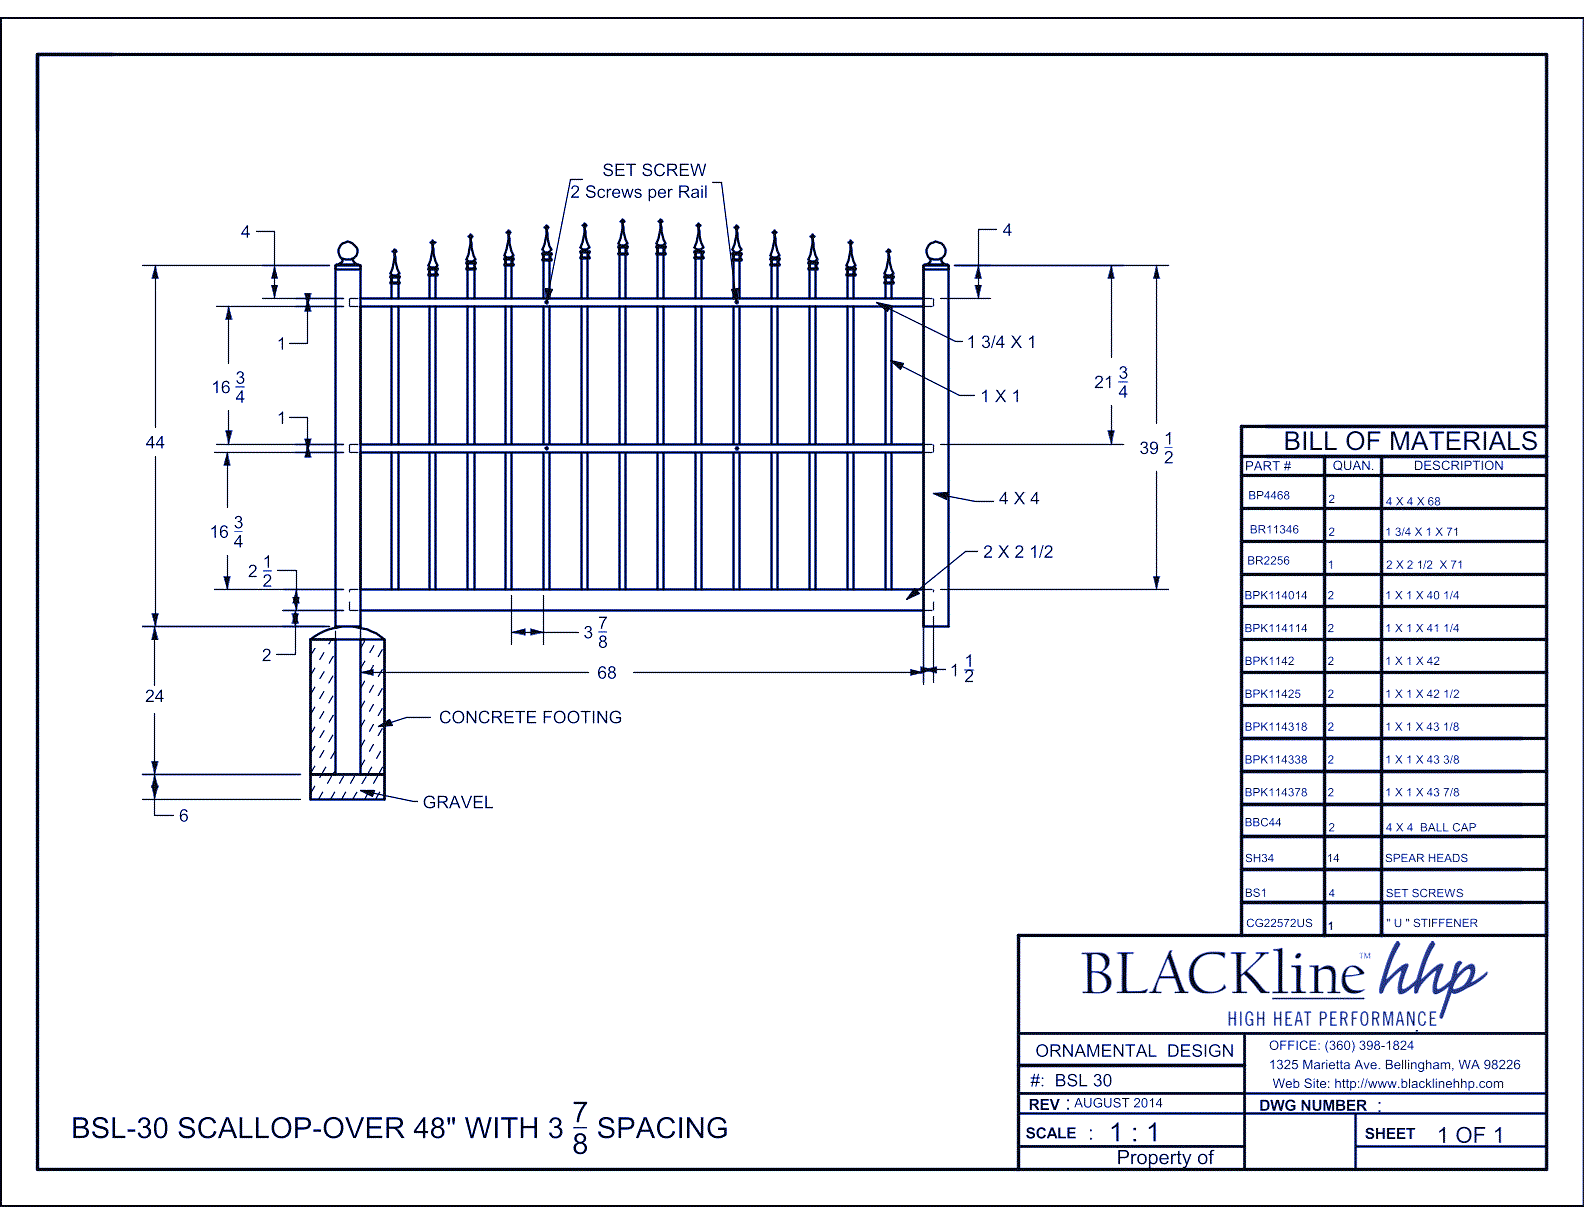 BSL-30: Scallop-Over 48" with 3 7/8” Spacing